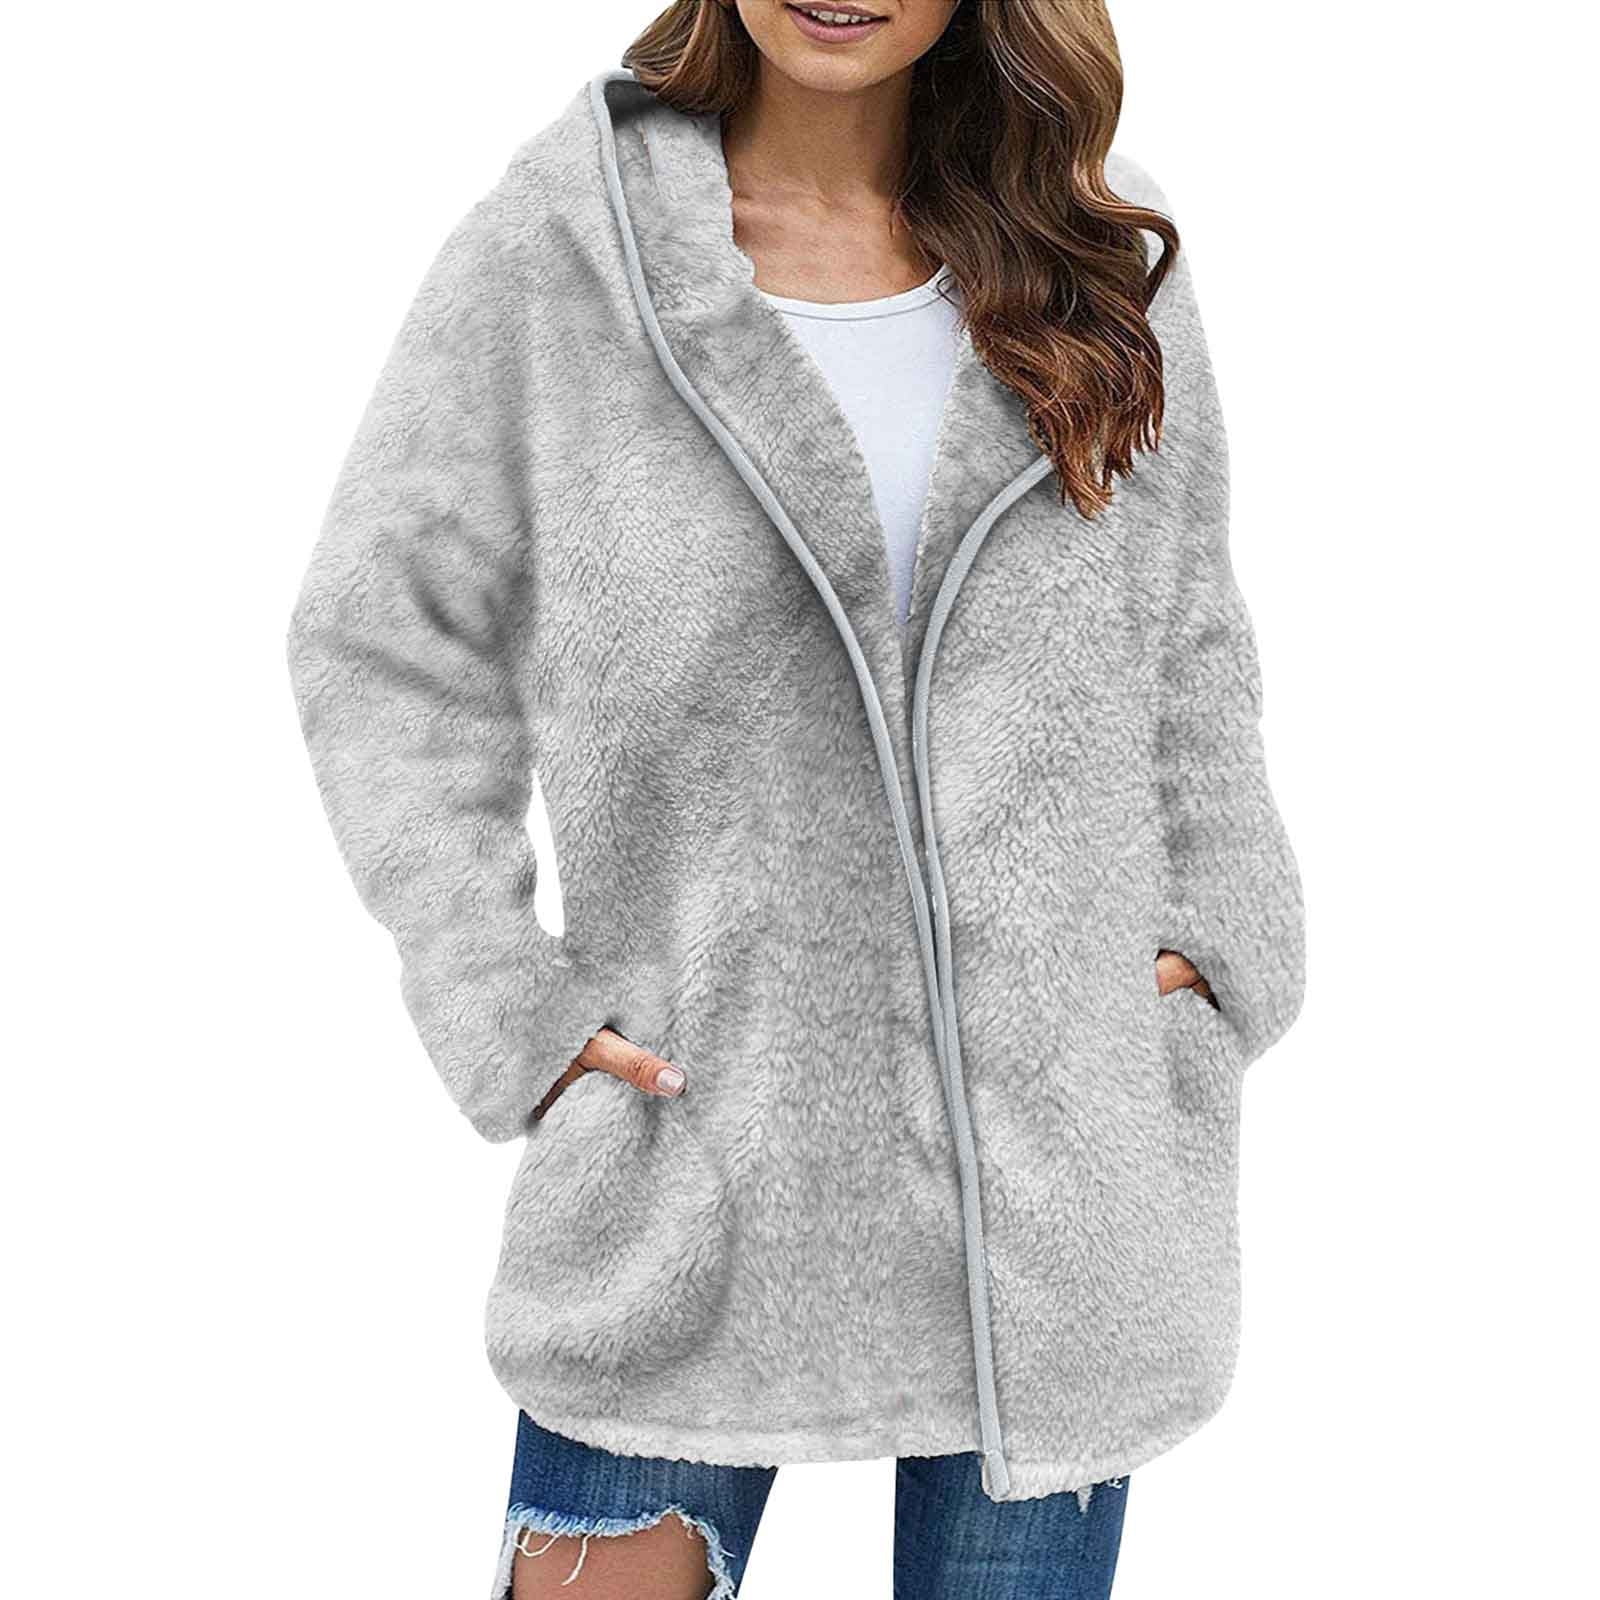 Shakumy Bed Jackets Women Casual Fashion Thick Solid Color Knit ...